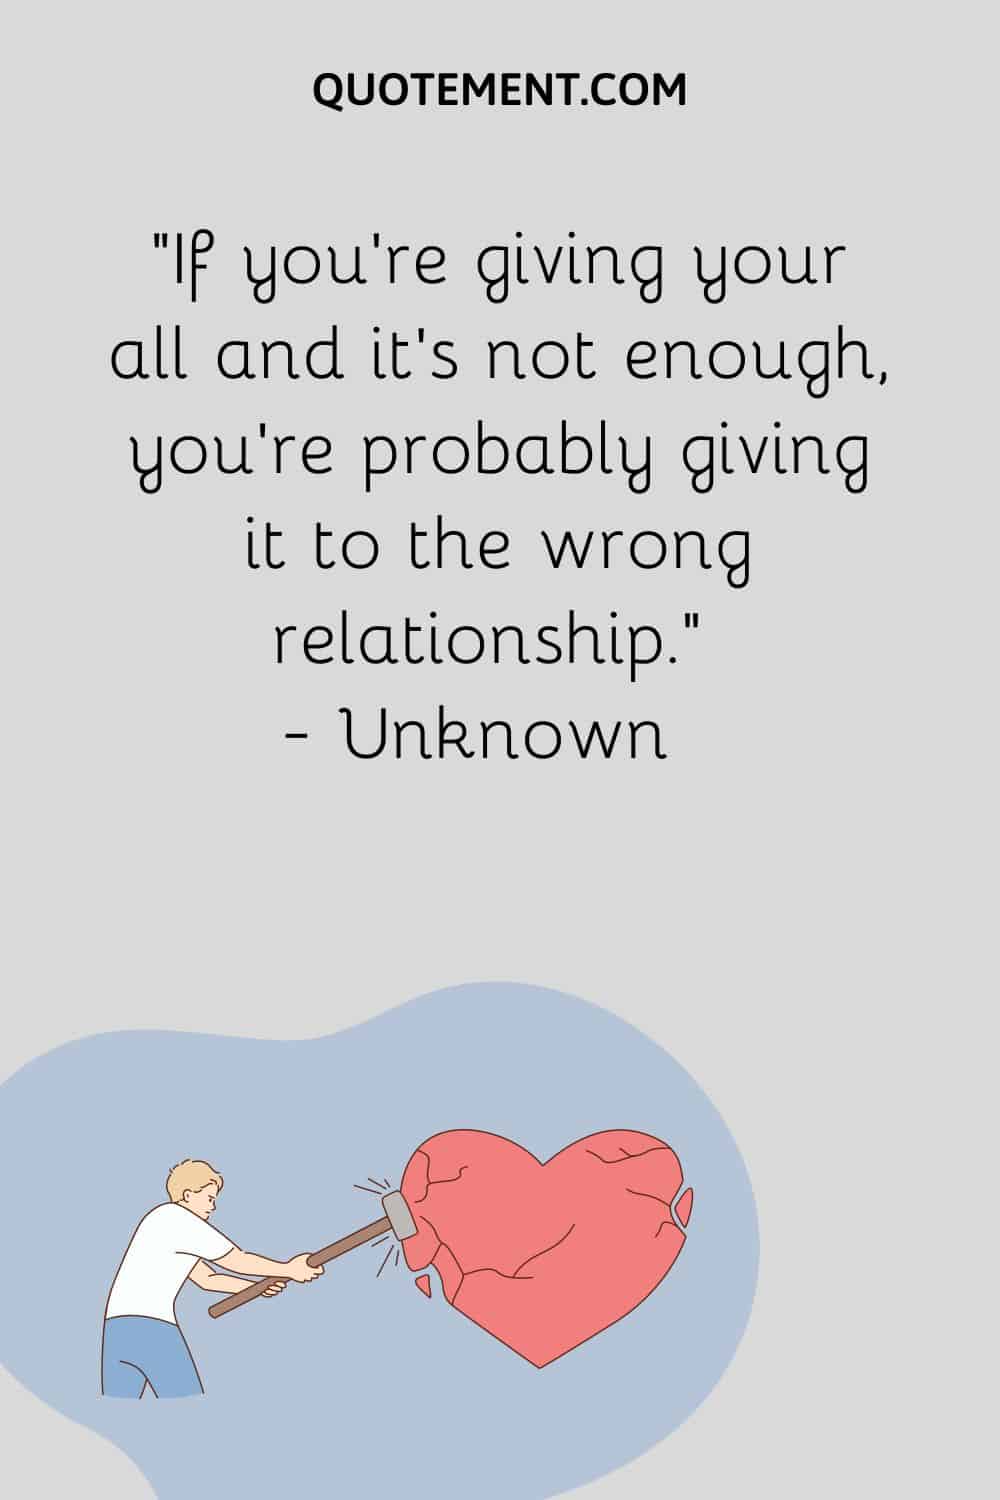 If you’re giving your all and it’s not enough, you’re probably giving it to the wrong relationship